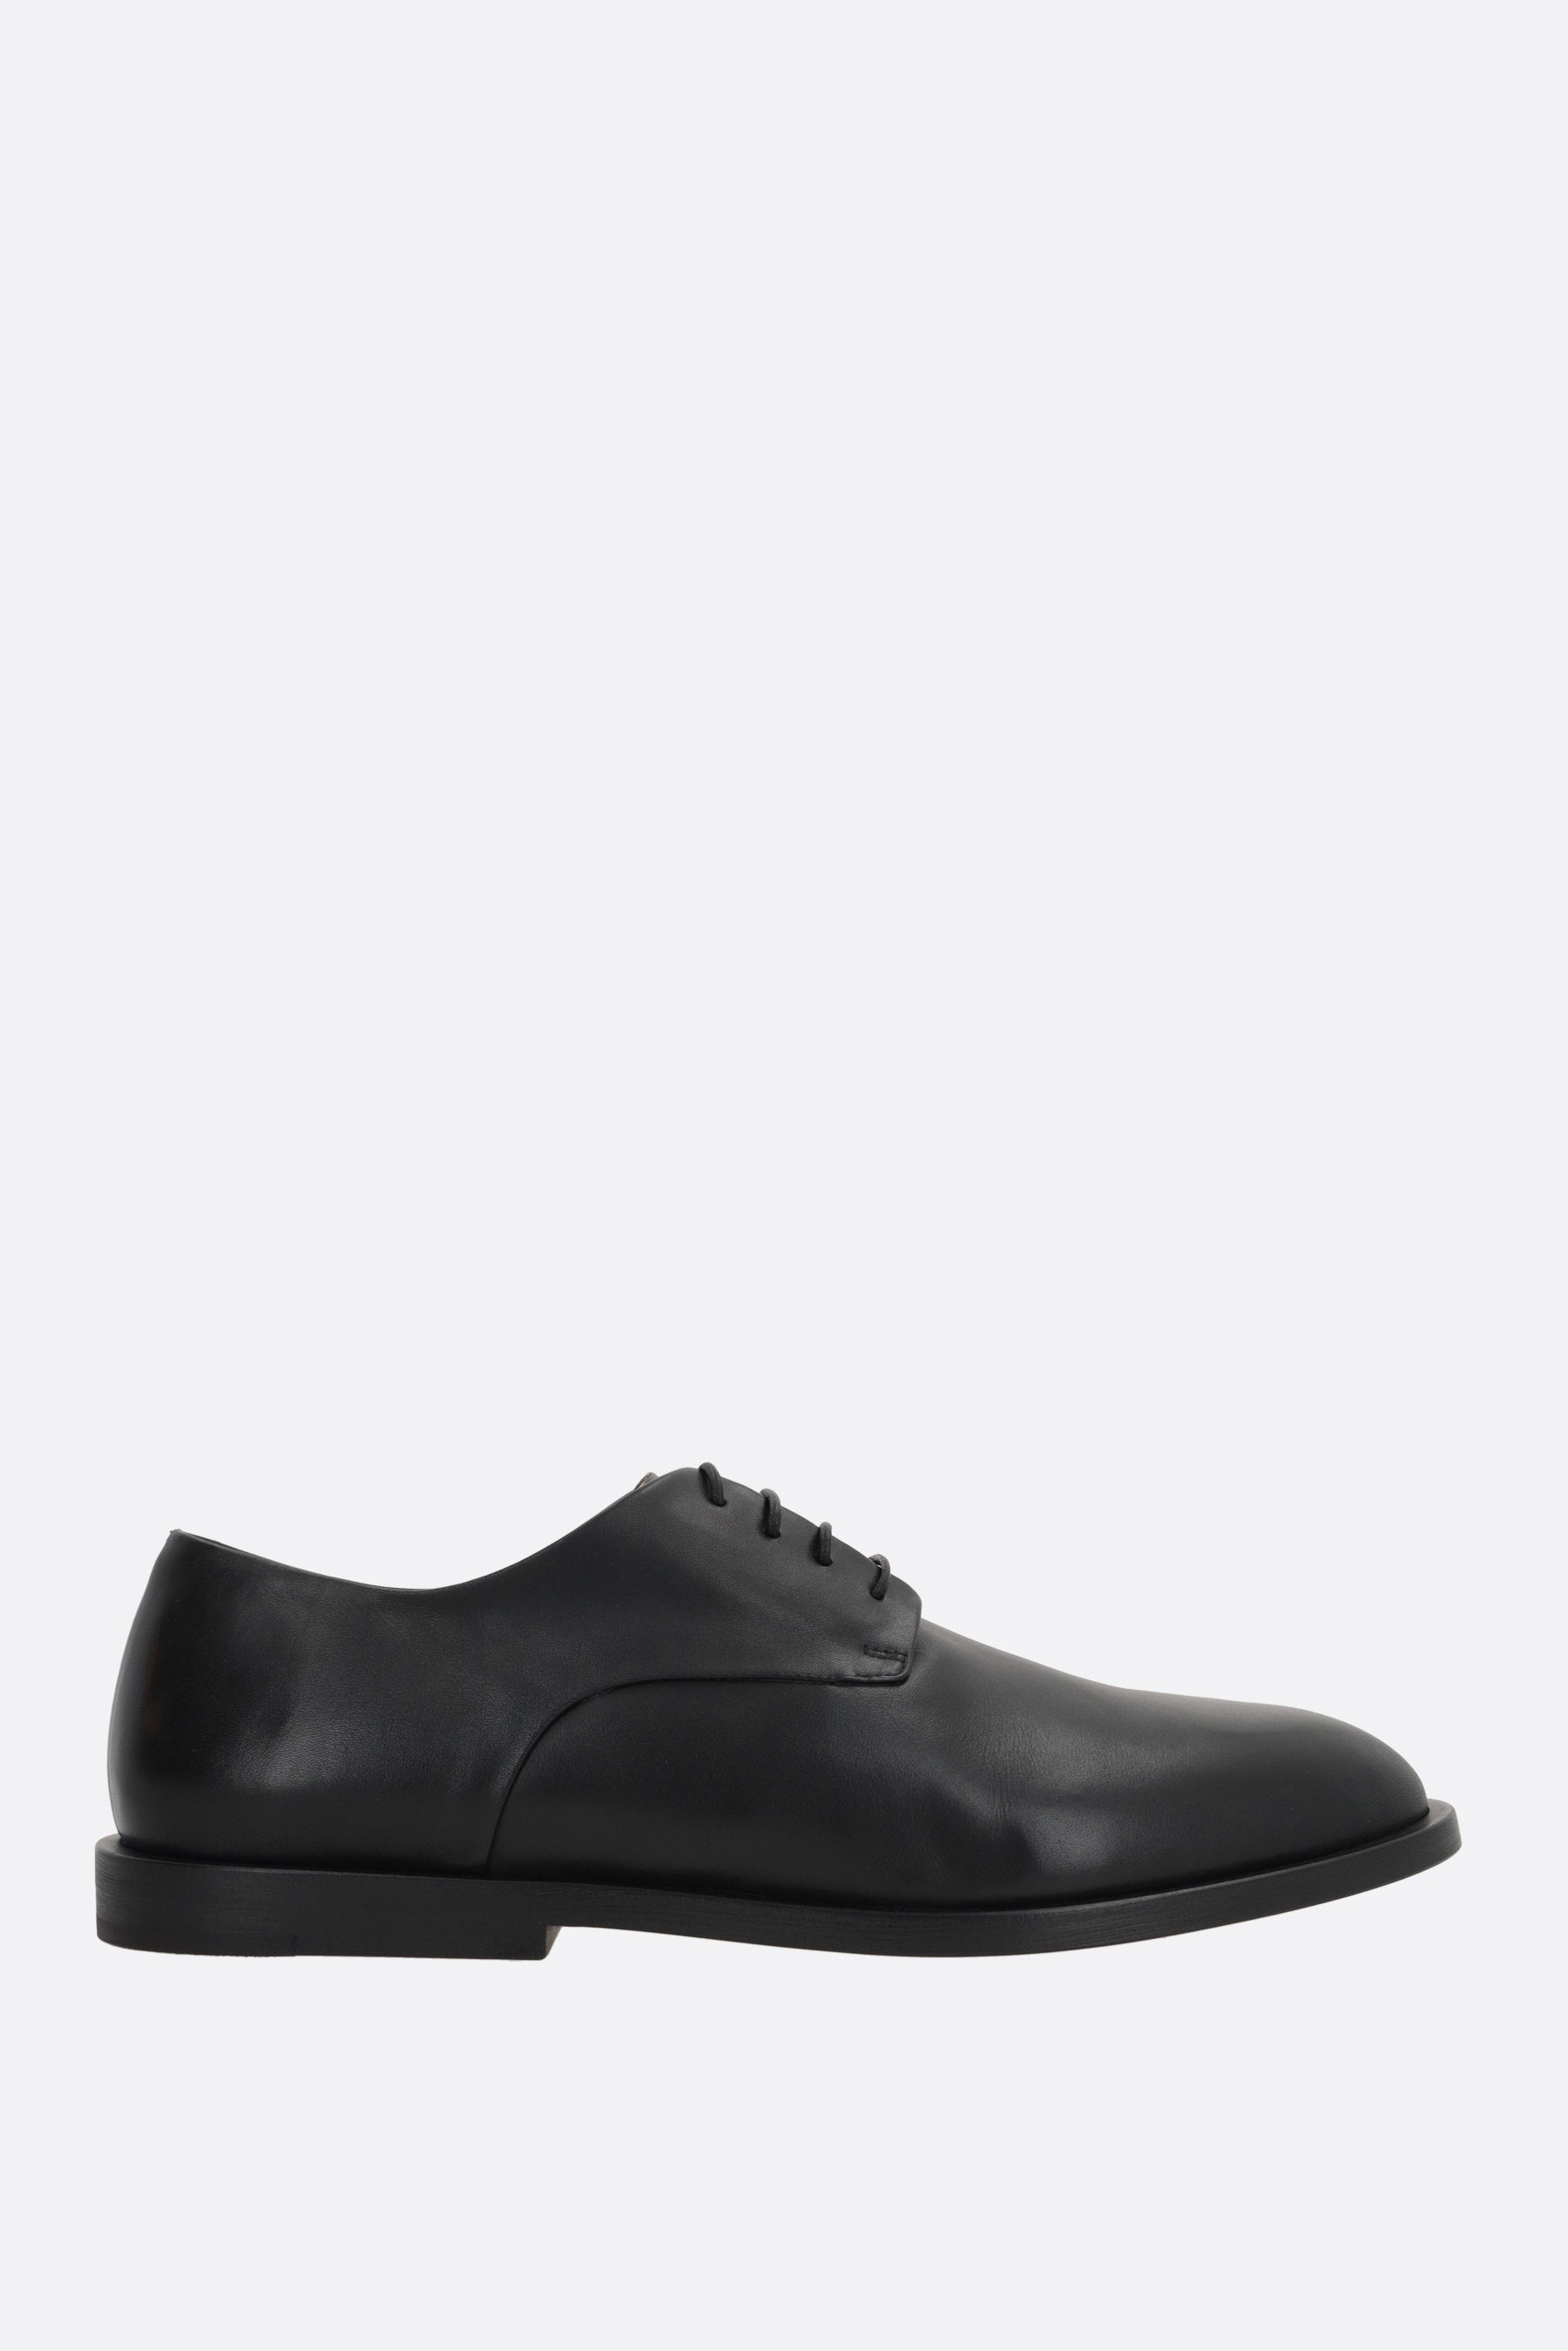 Mando smooth leather derby shoes